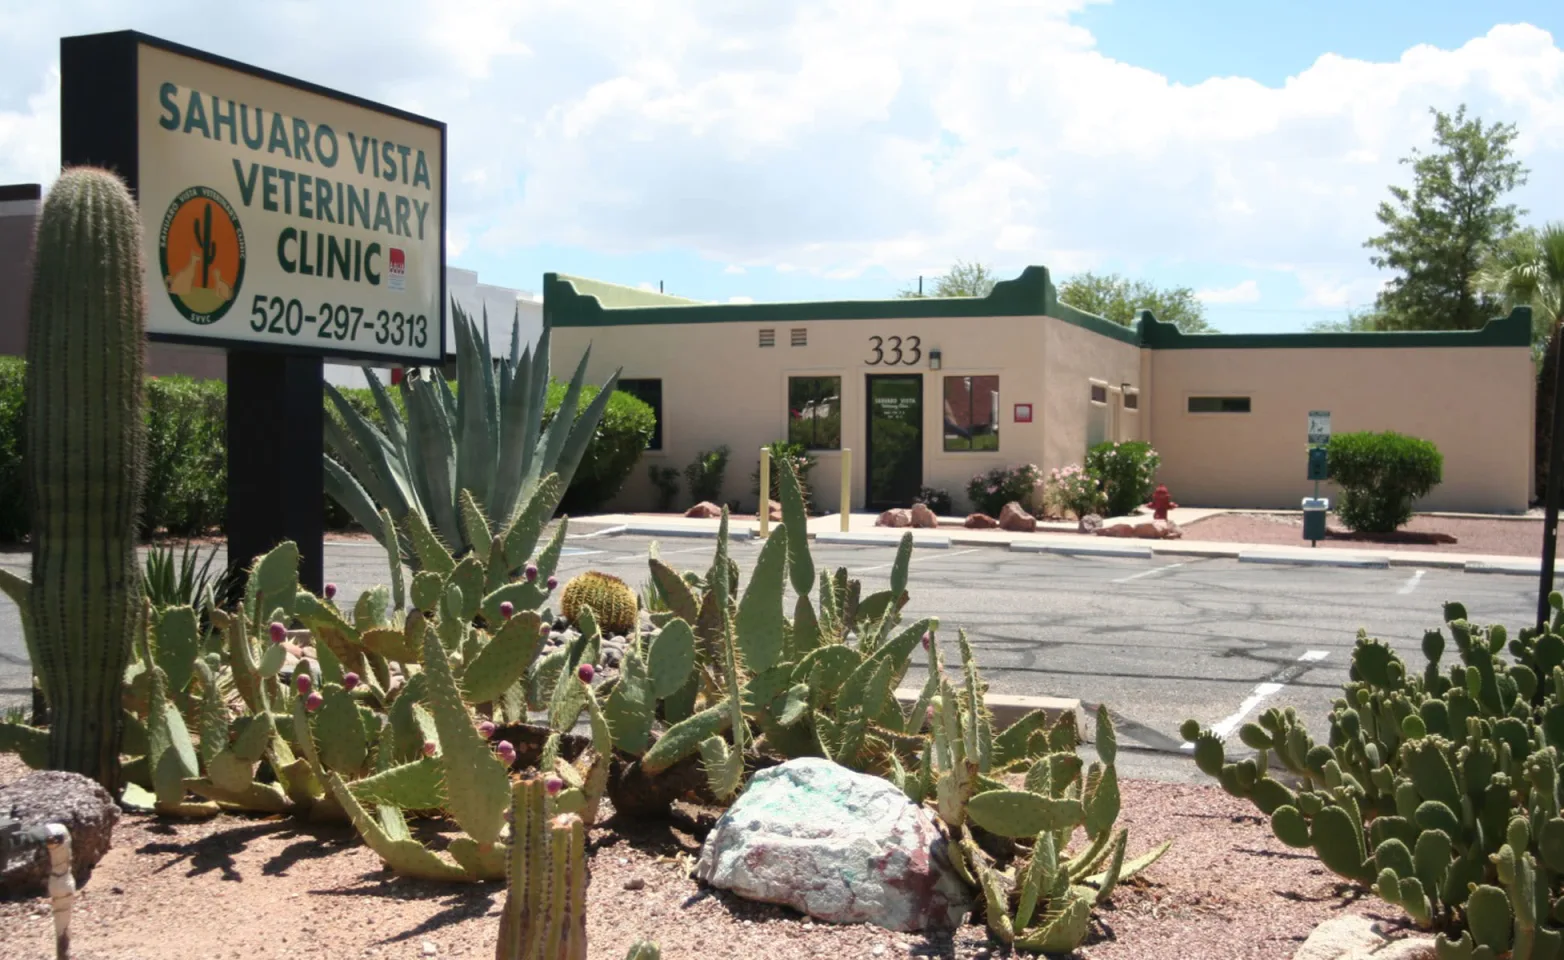 exterior of Sahuaro Vista Veterinary Clinic and parking lot with desert cacti and landscaping